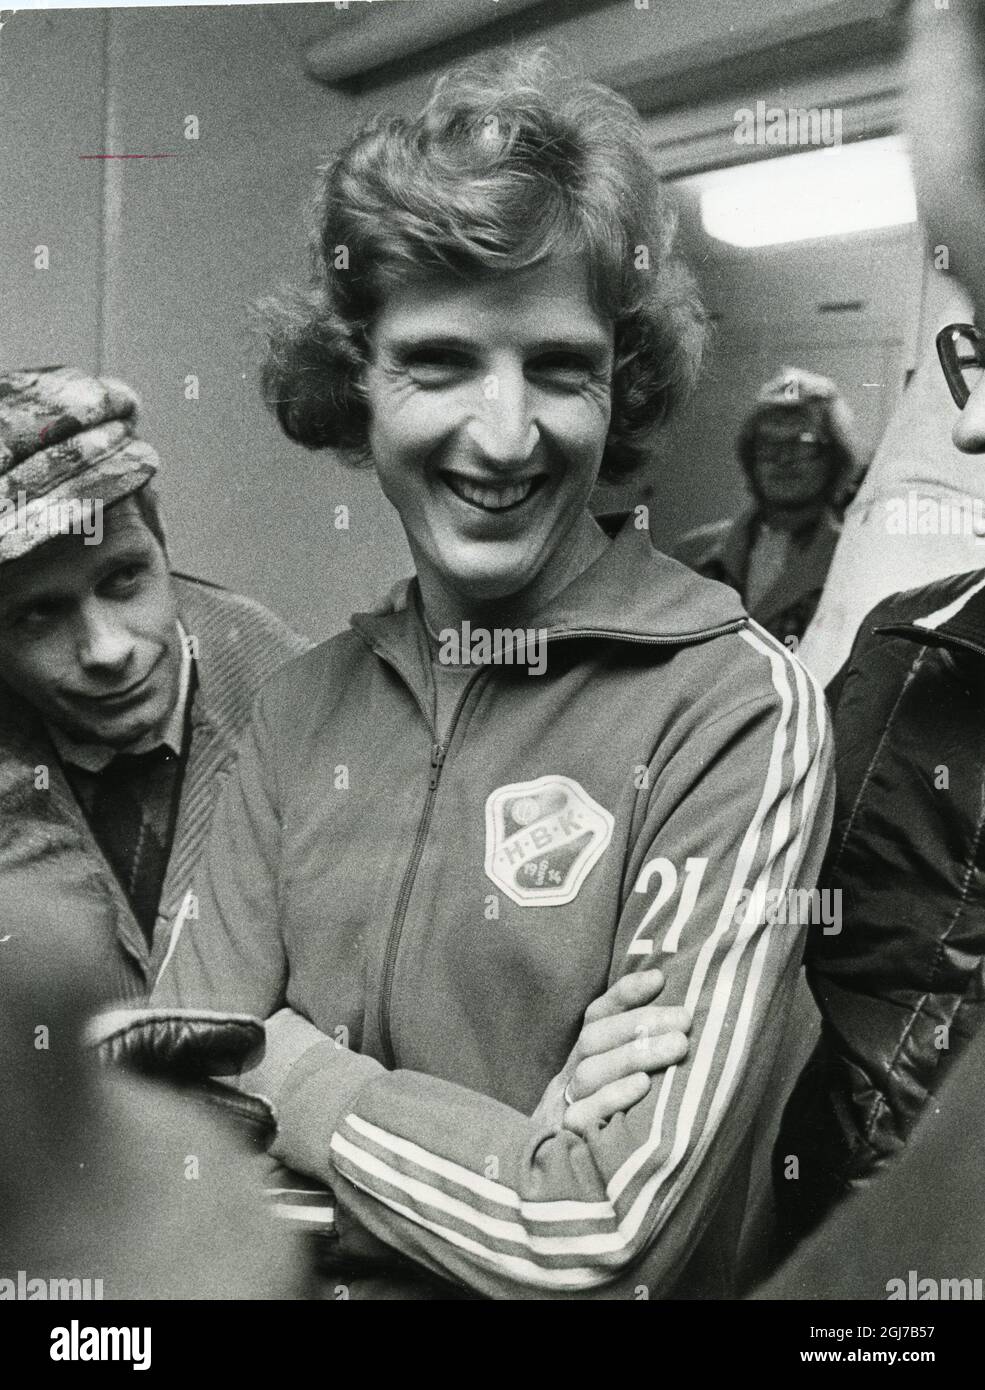 HALMSTAD 1976-10- 17 Roy Hodgson is seen smiling after his team